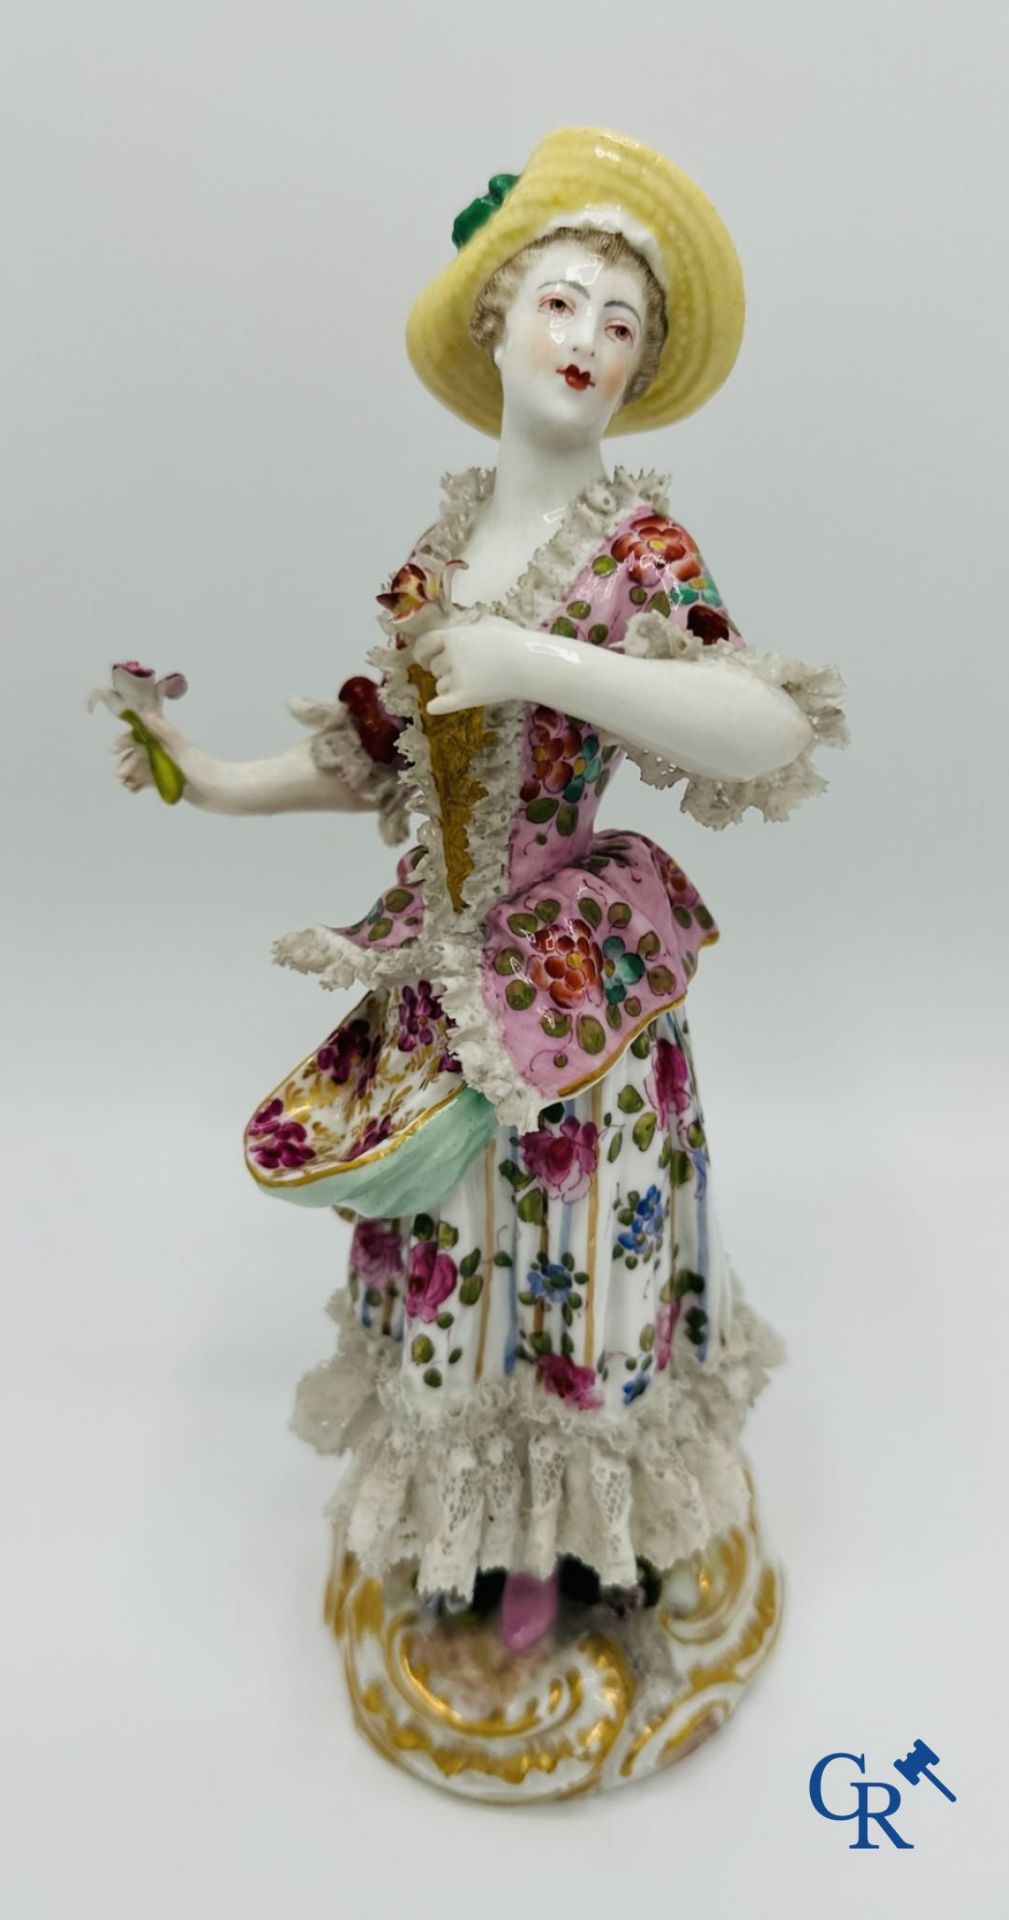 Porcelain: 3 groups of multicoloured decorated porcelain in the style of Meissen. 19th century. - Image 5 of 12